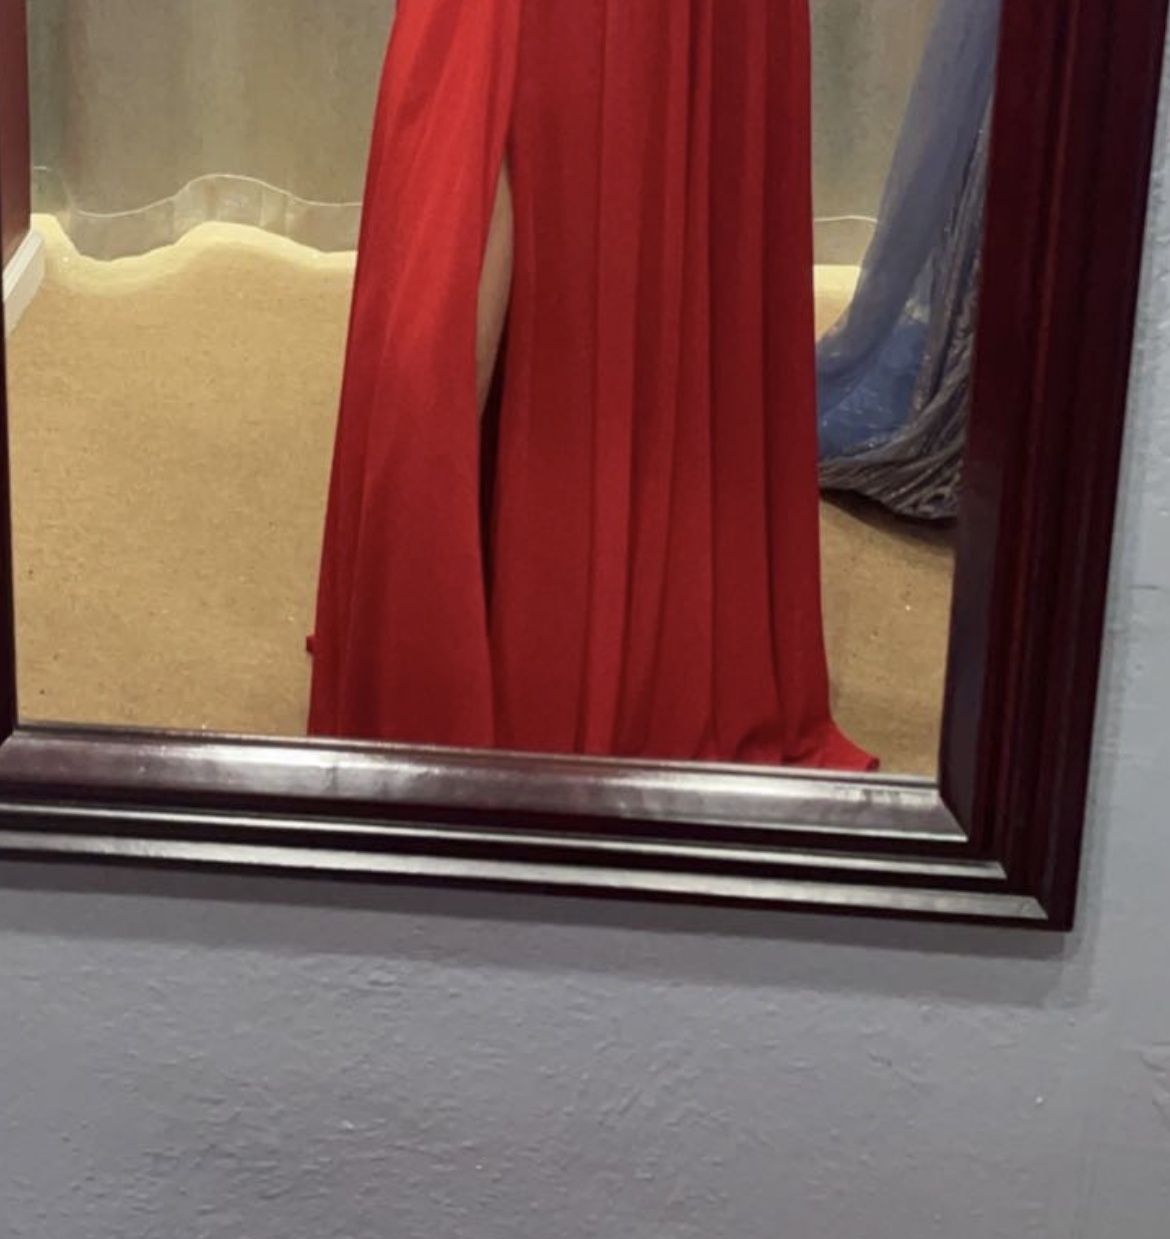 Size 0 Red Ball Gown on Queenly